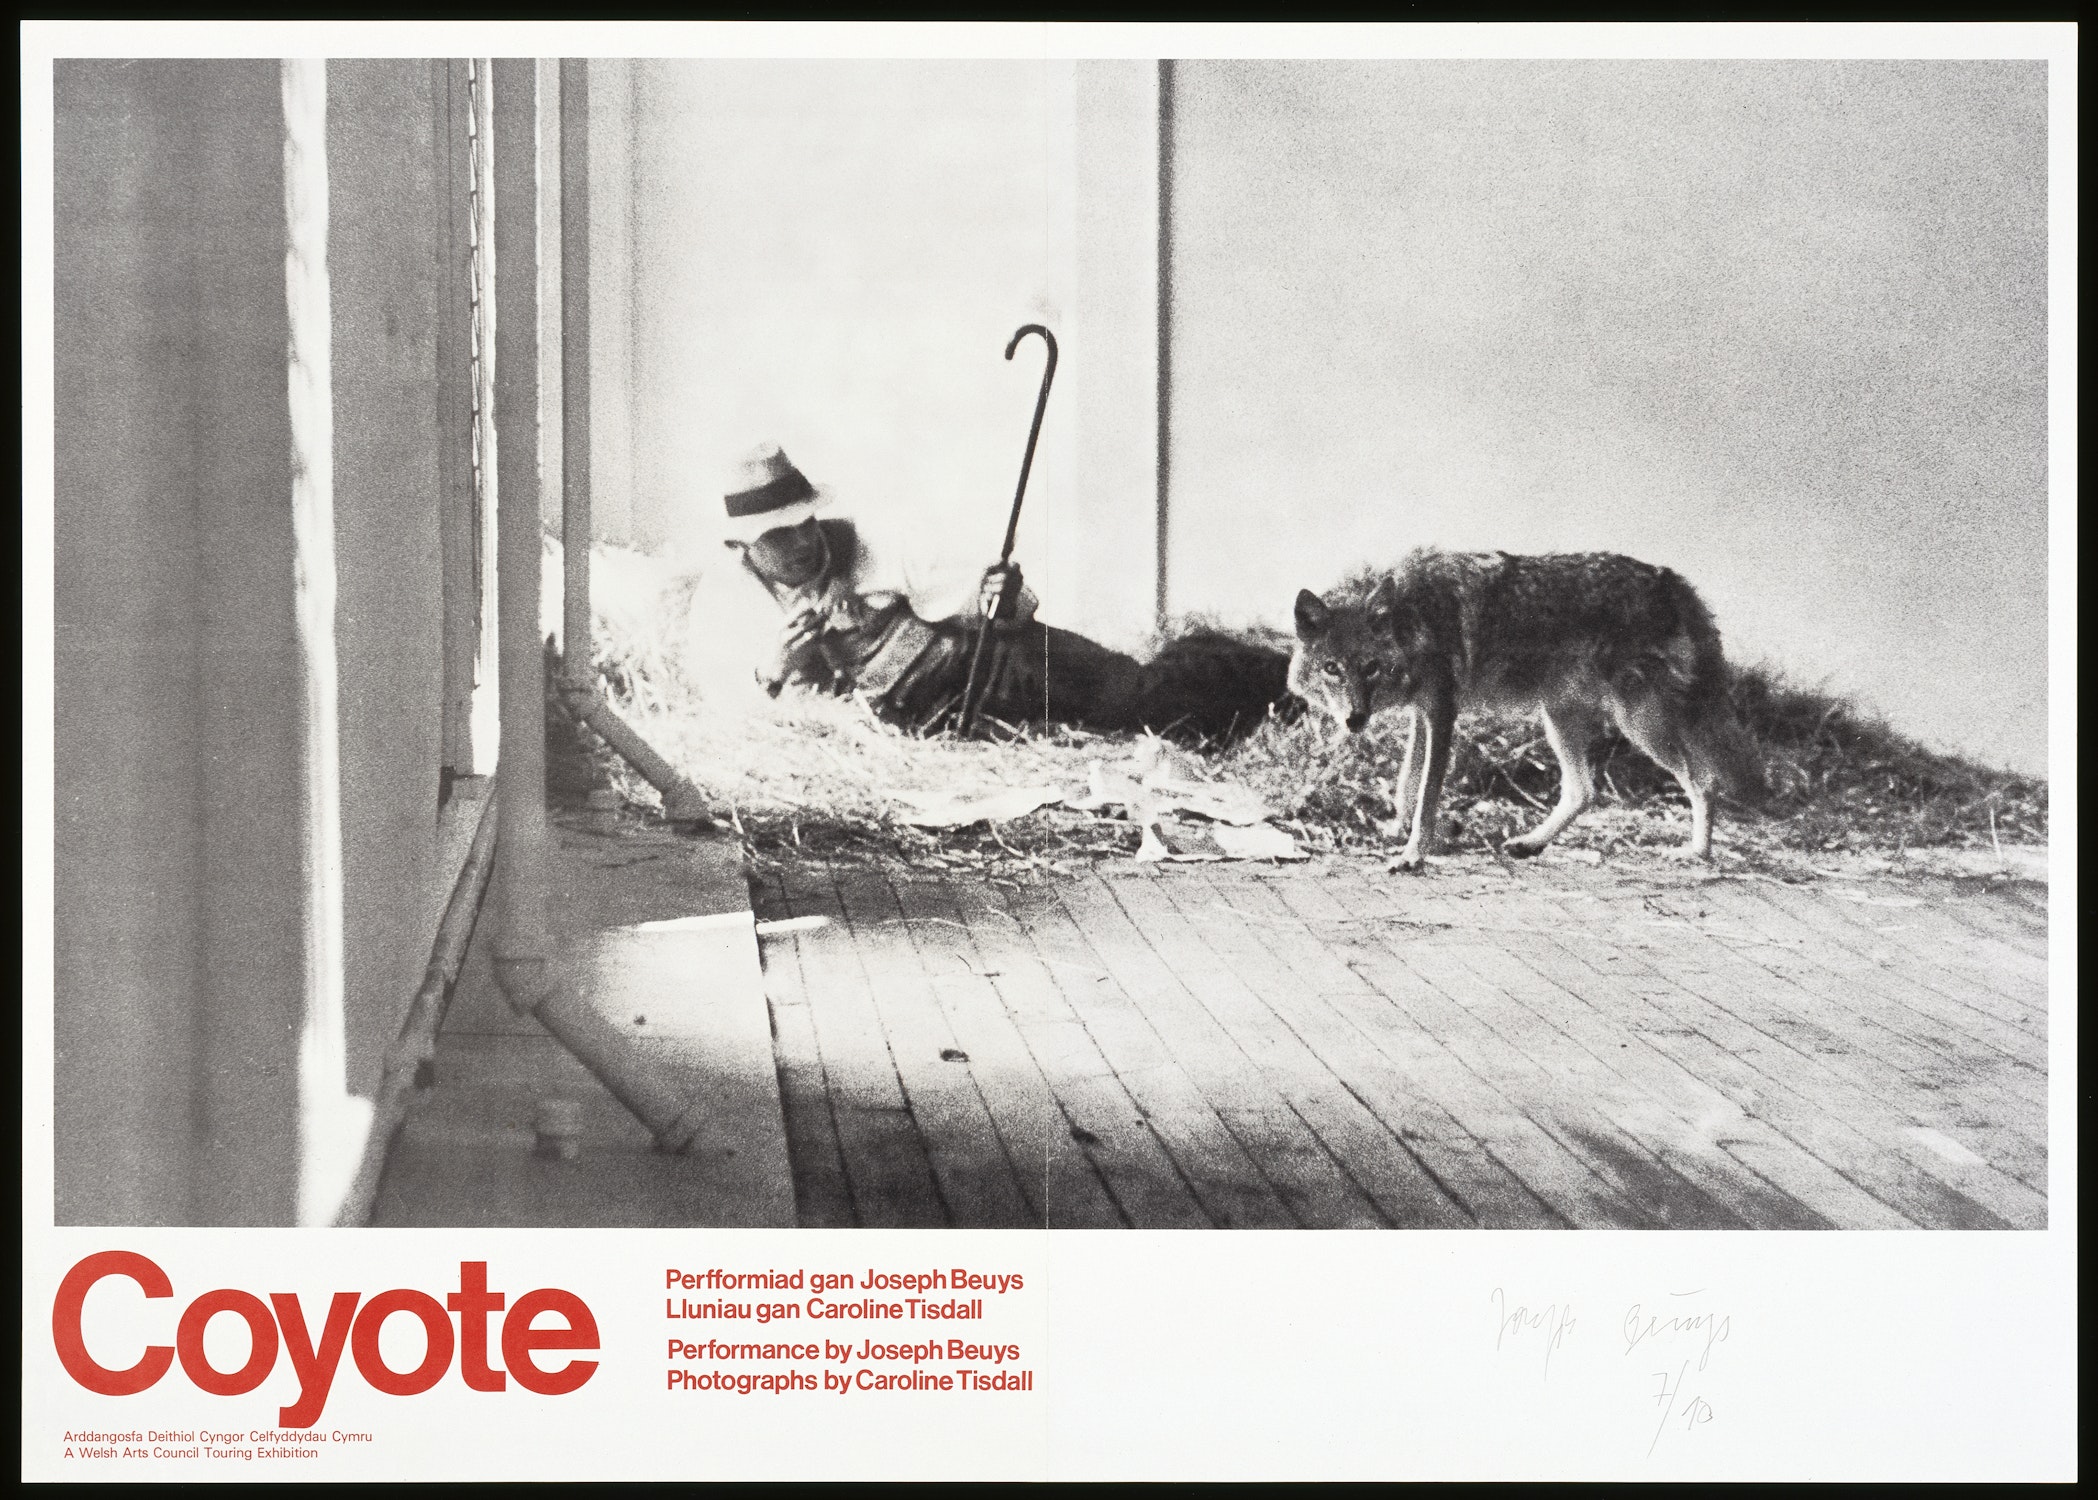 The Western Man in the Midwest: Joseph Beuys in America